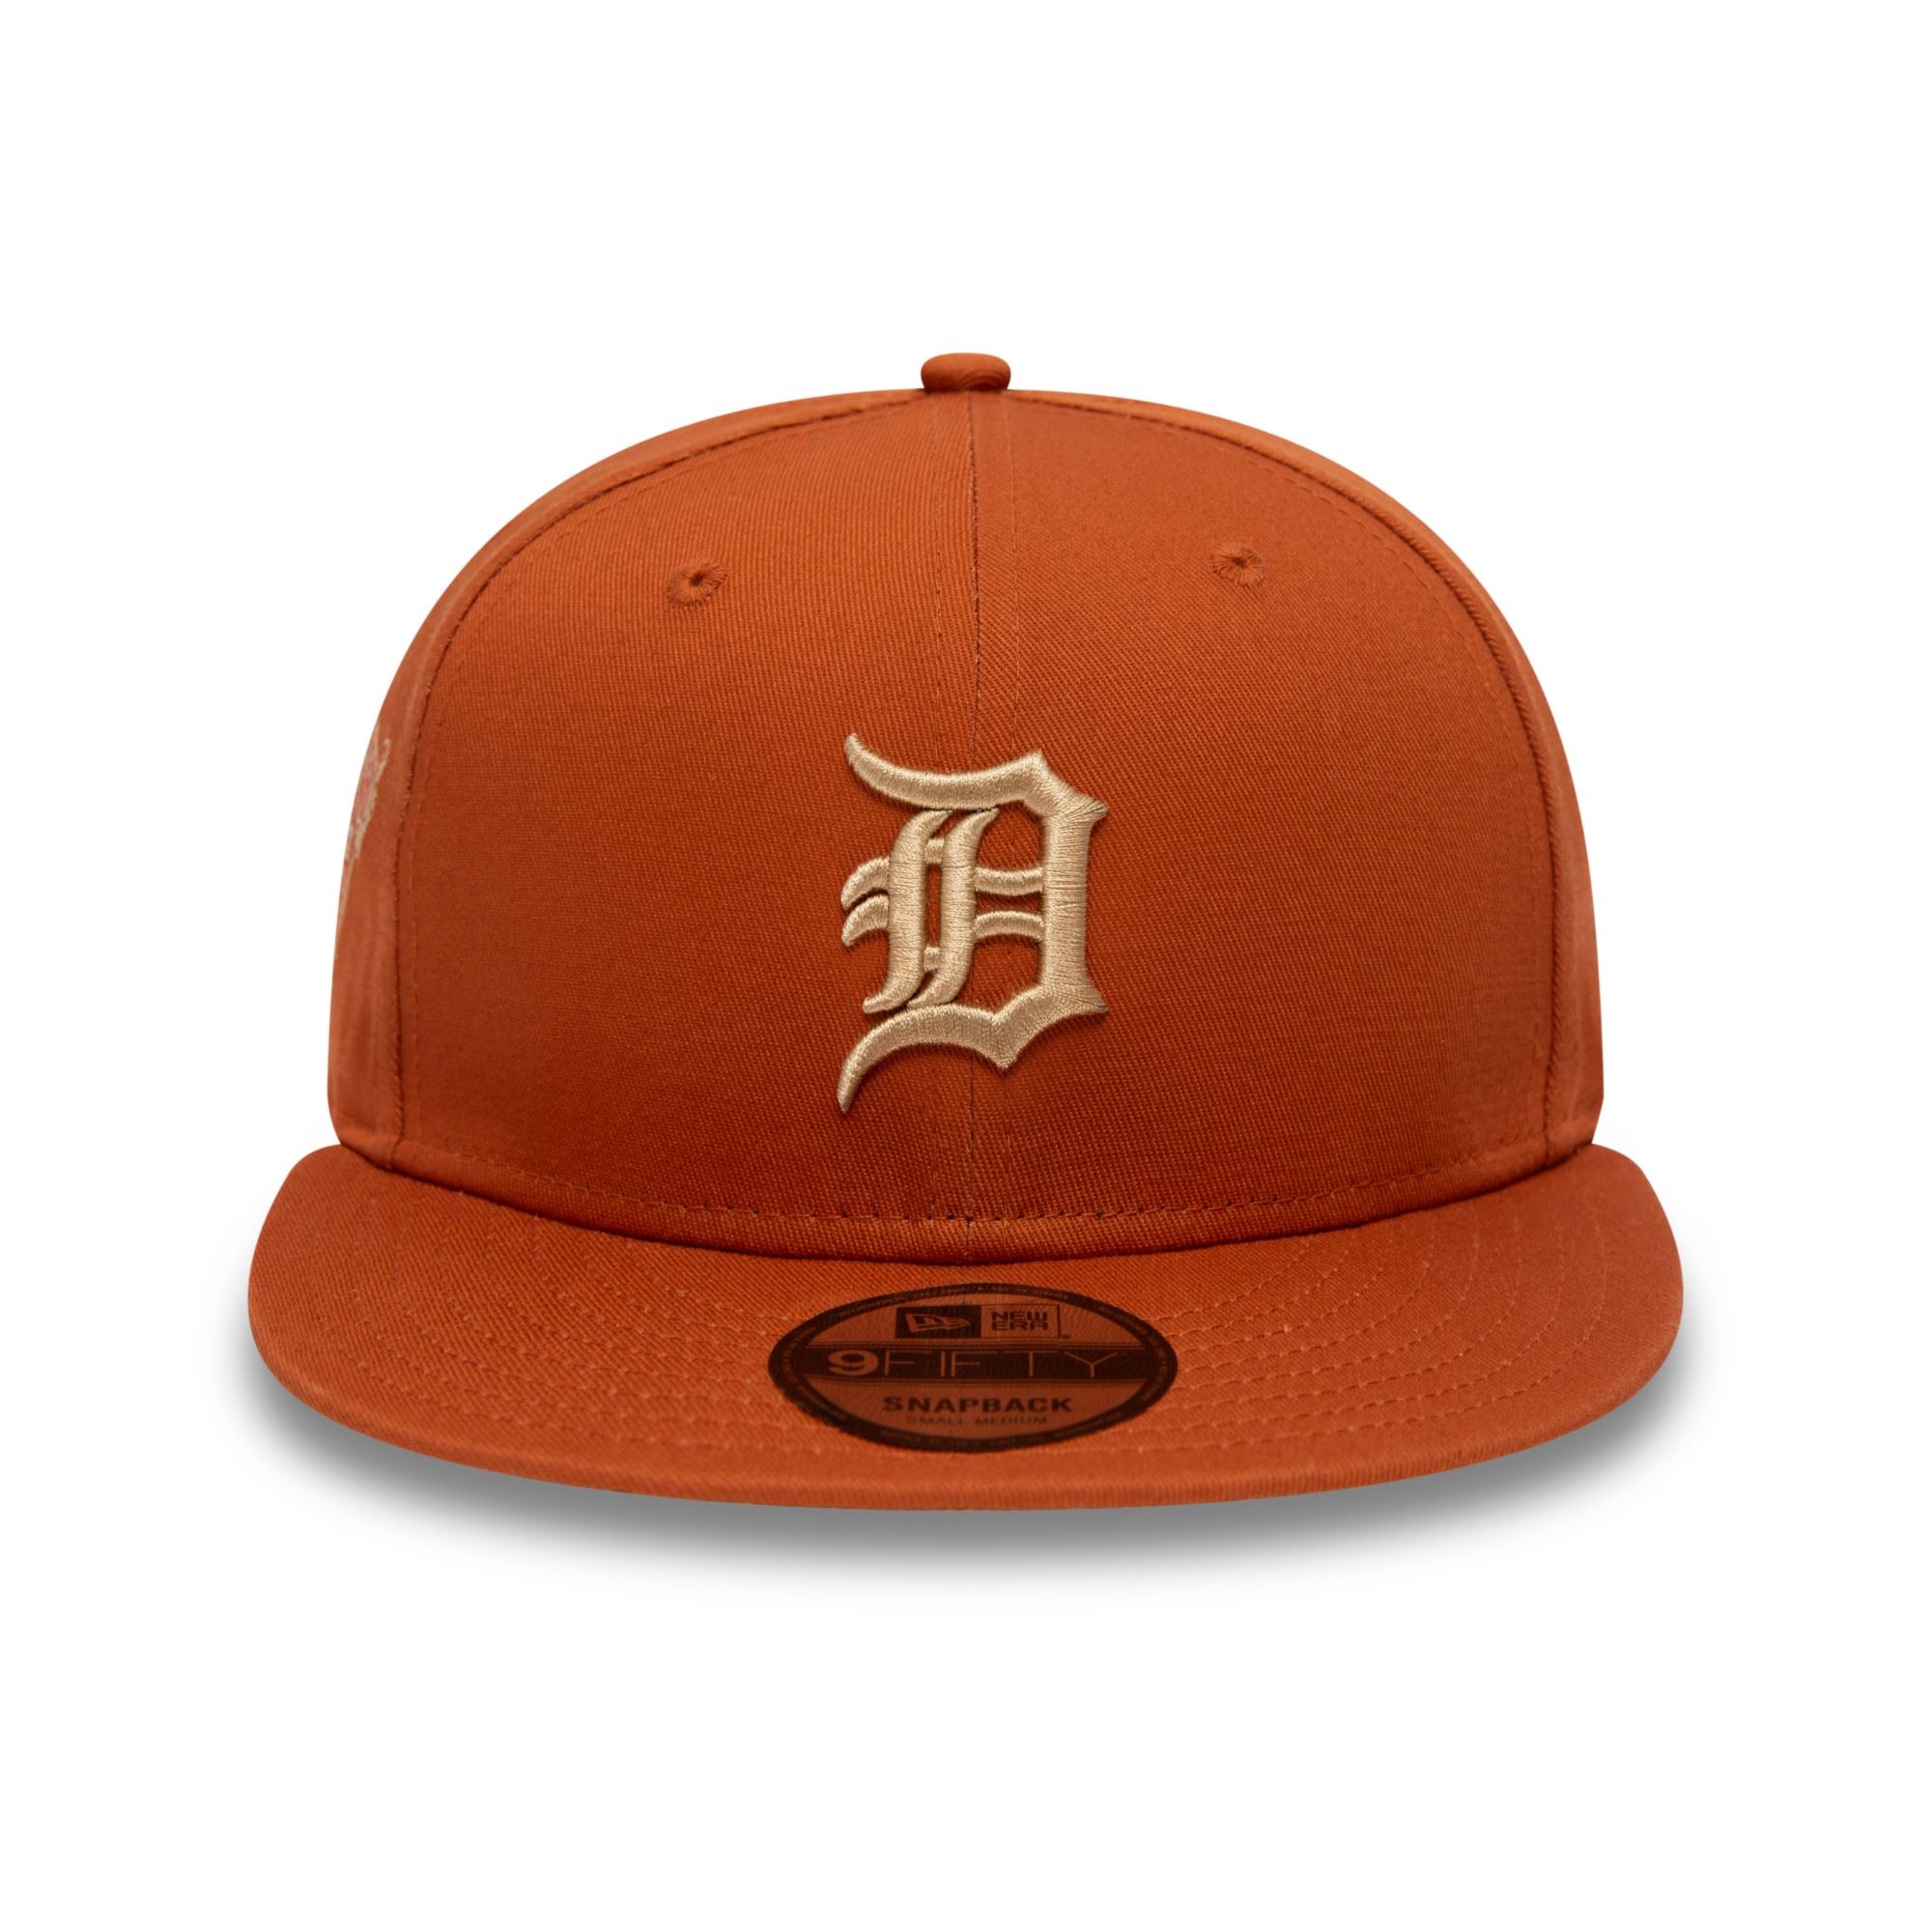 Detroit Tigers MLB Side Patch Brown 9Fifty Snaback Cap New Era